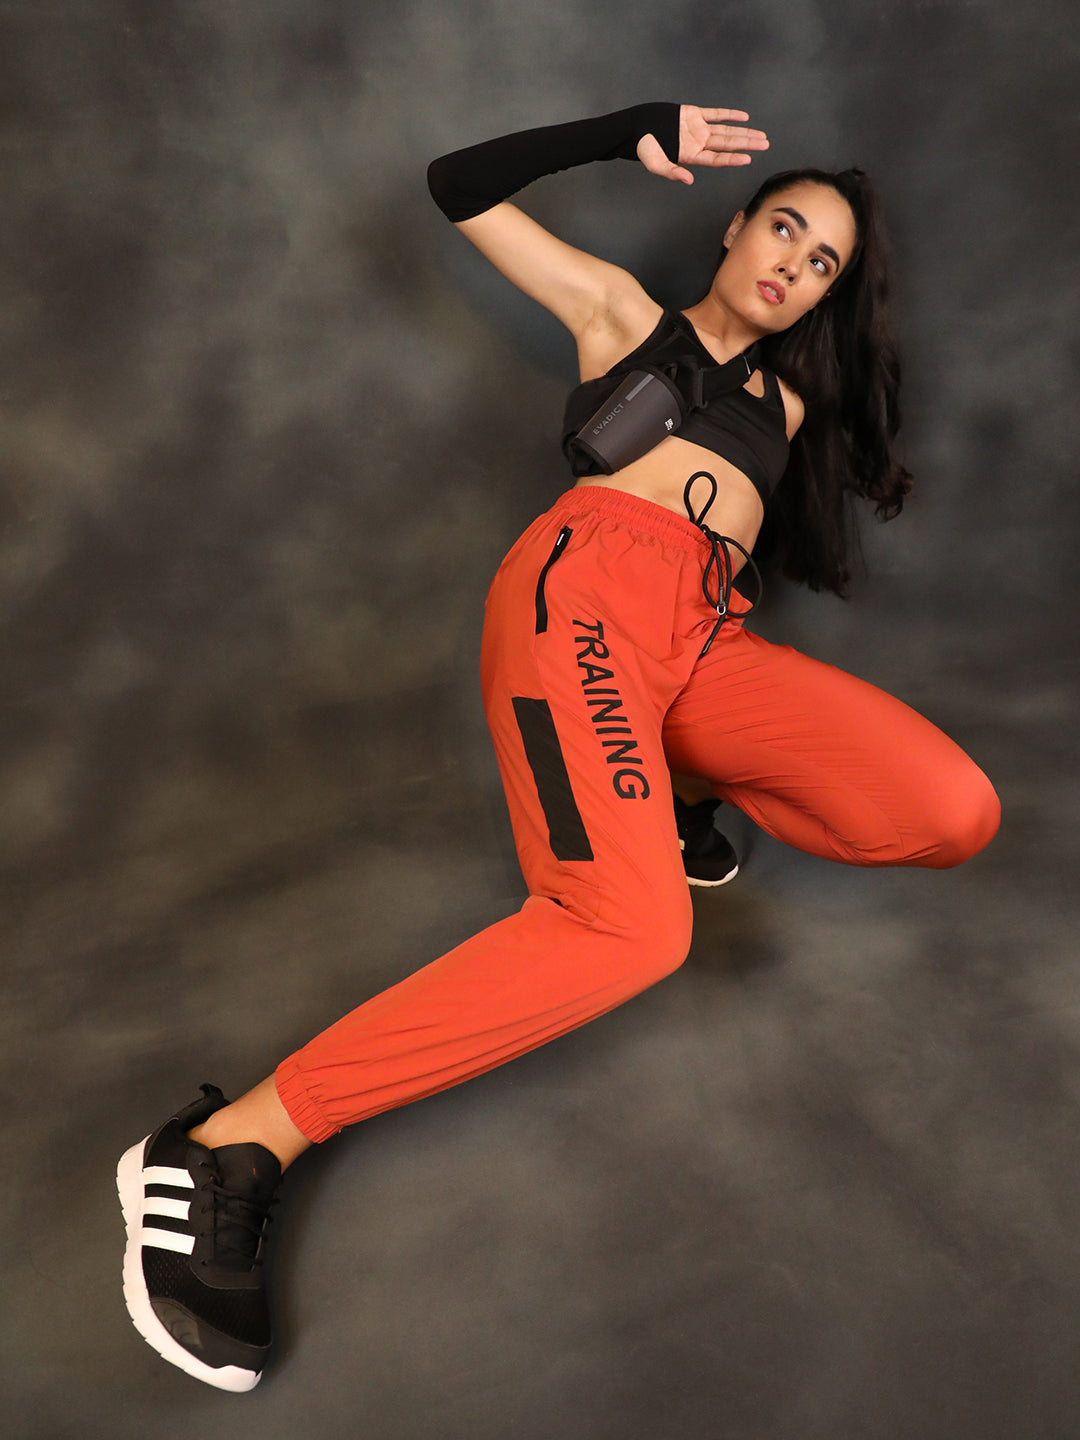 Women Sports Gym Trackpant Running Lower With Pocket